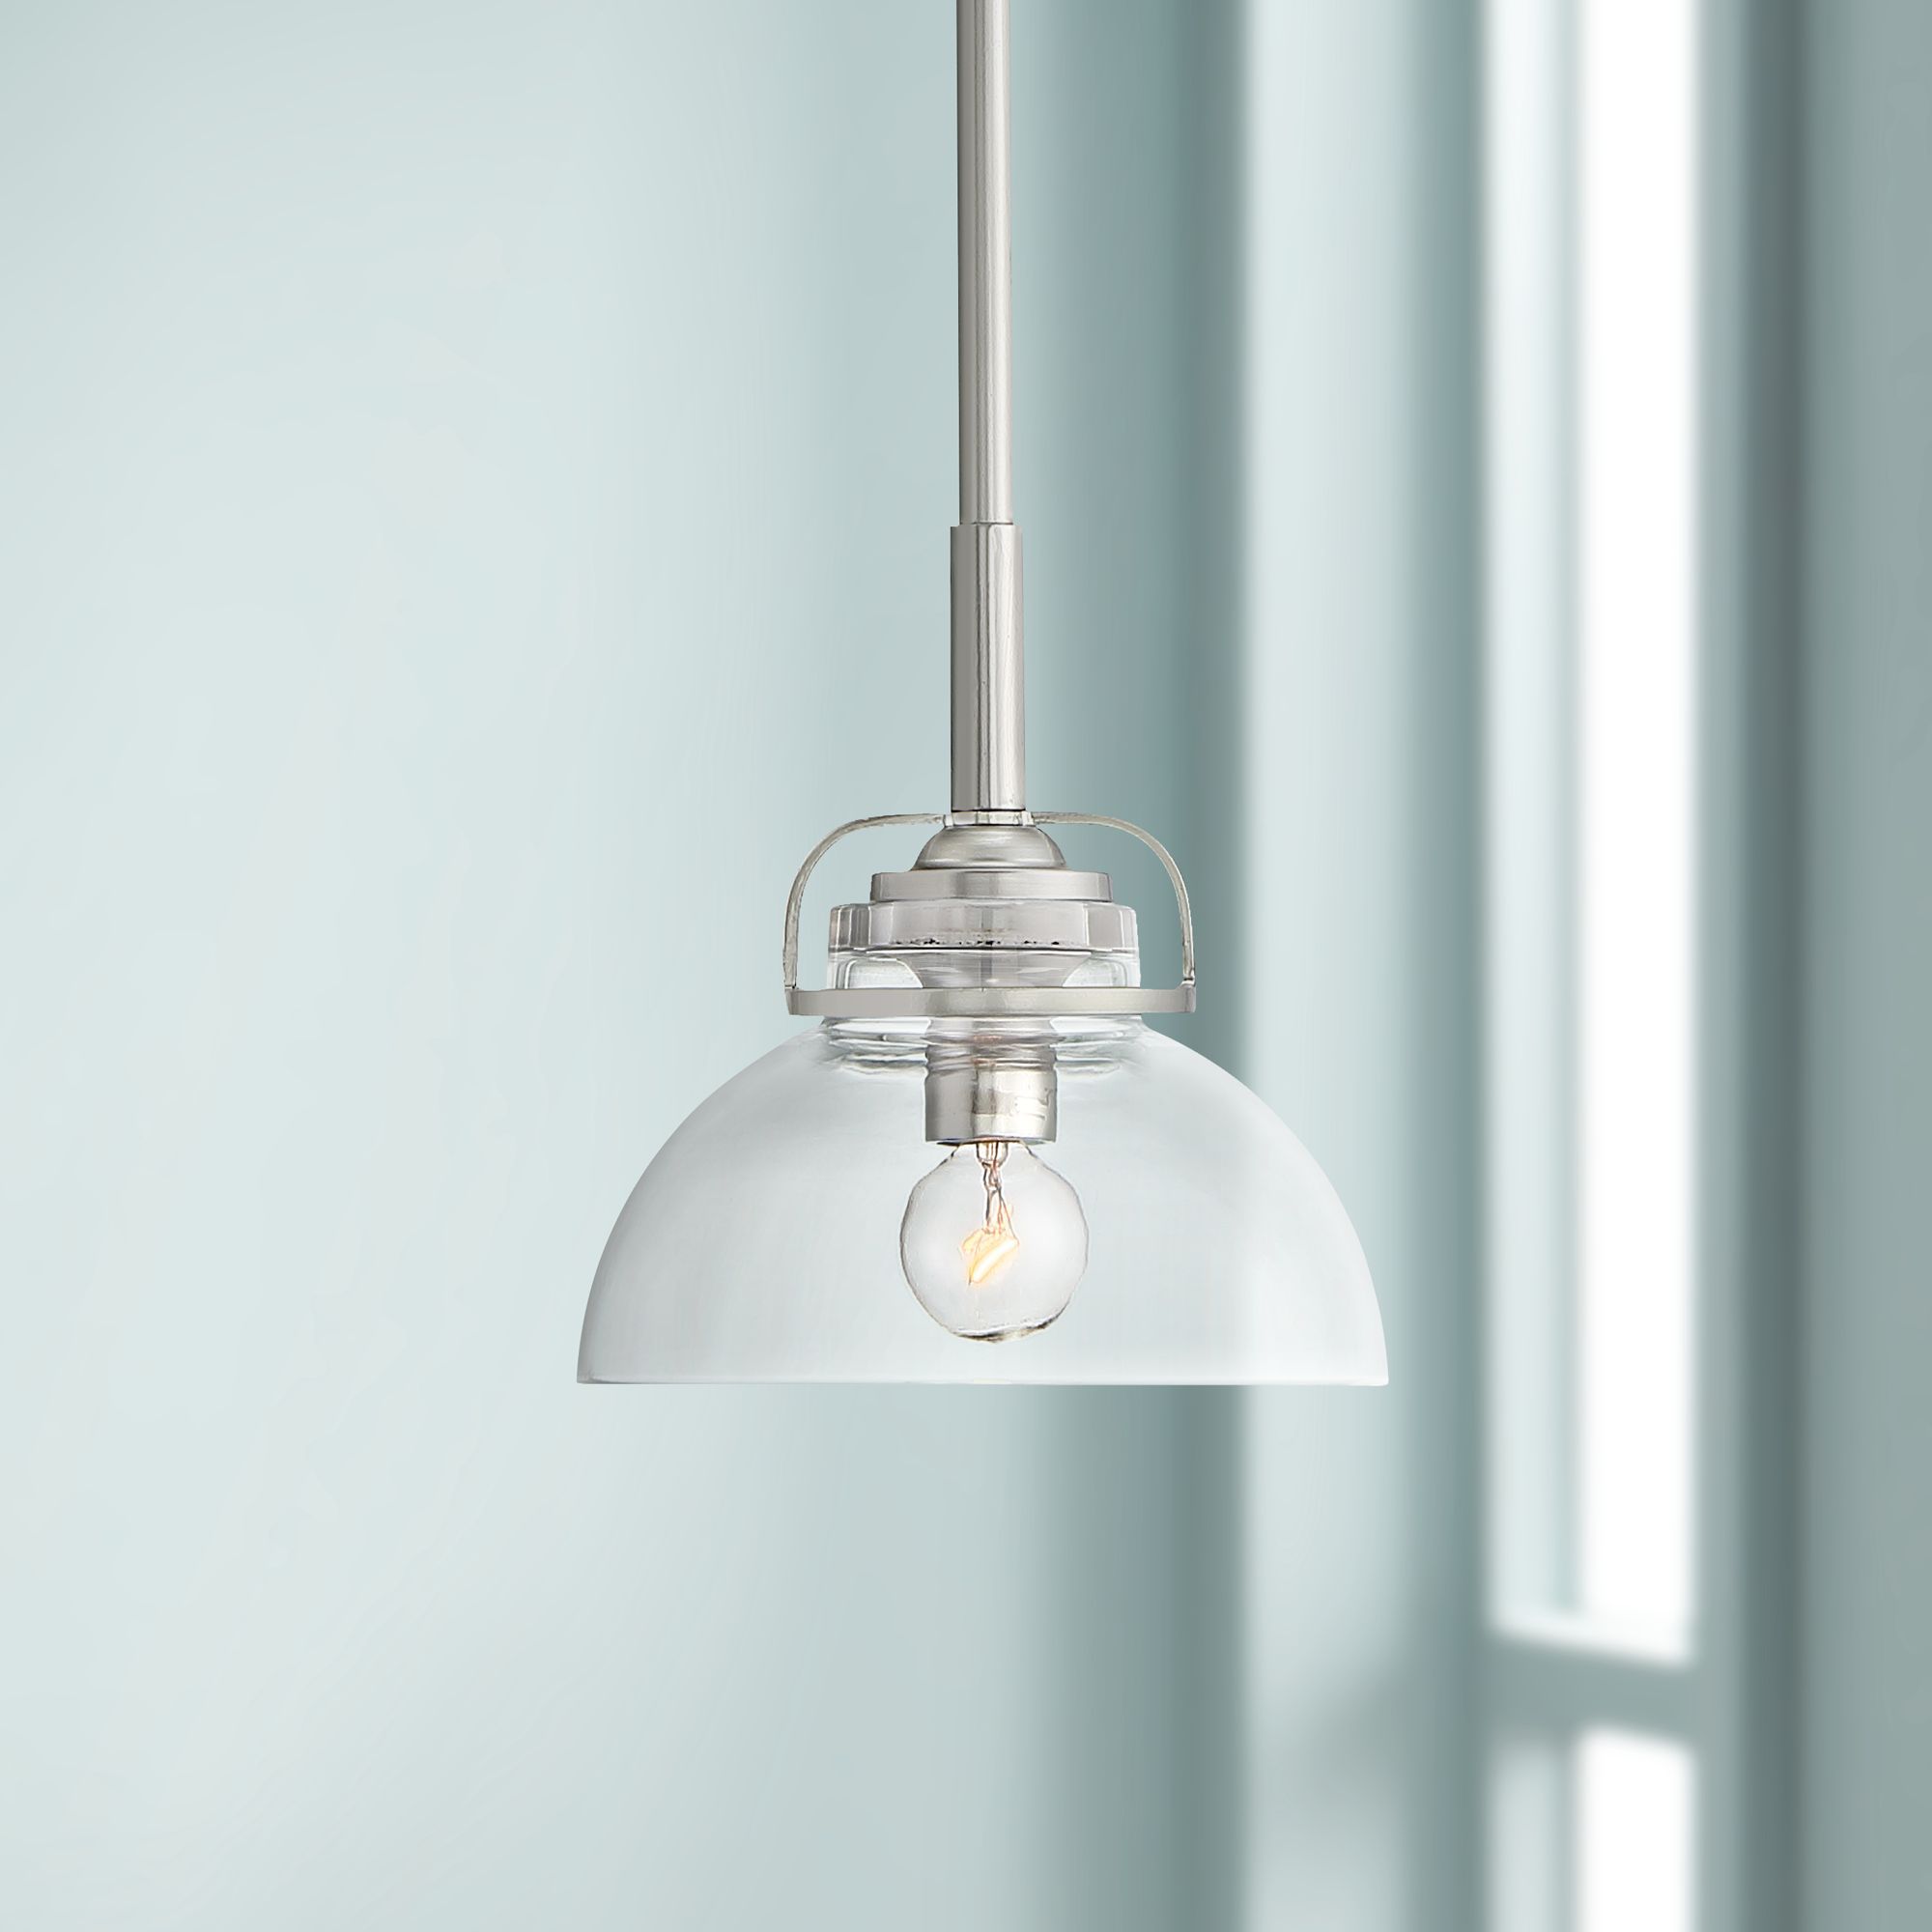 Possini Euro Design Brushed Nickel Mini Pendant Light 6 1 Intended For Gray And Nickel Kitchen Island Light Pendants Lights (View 9 of 15)